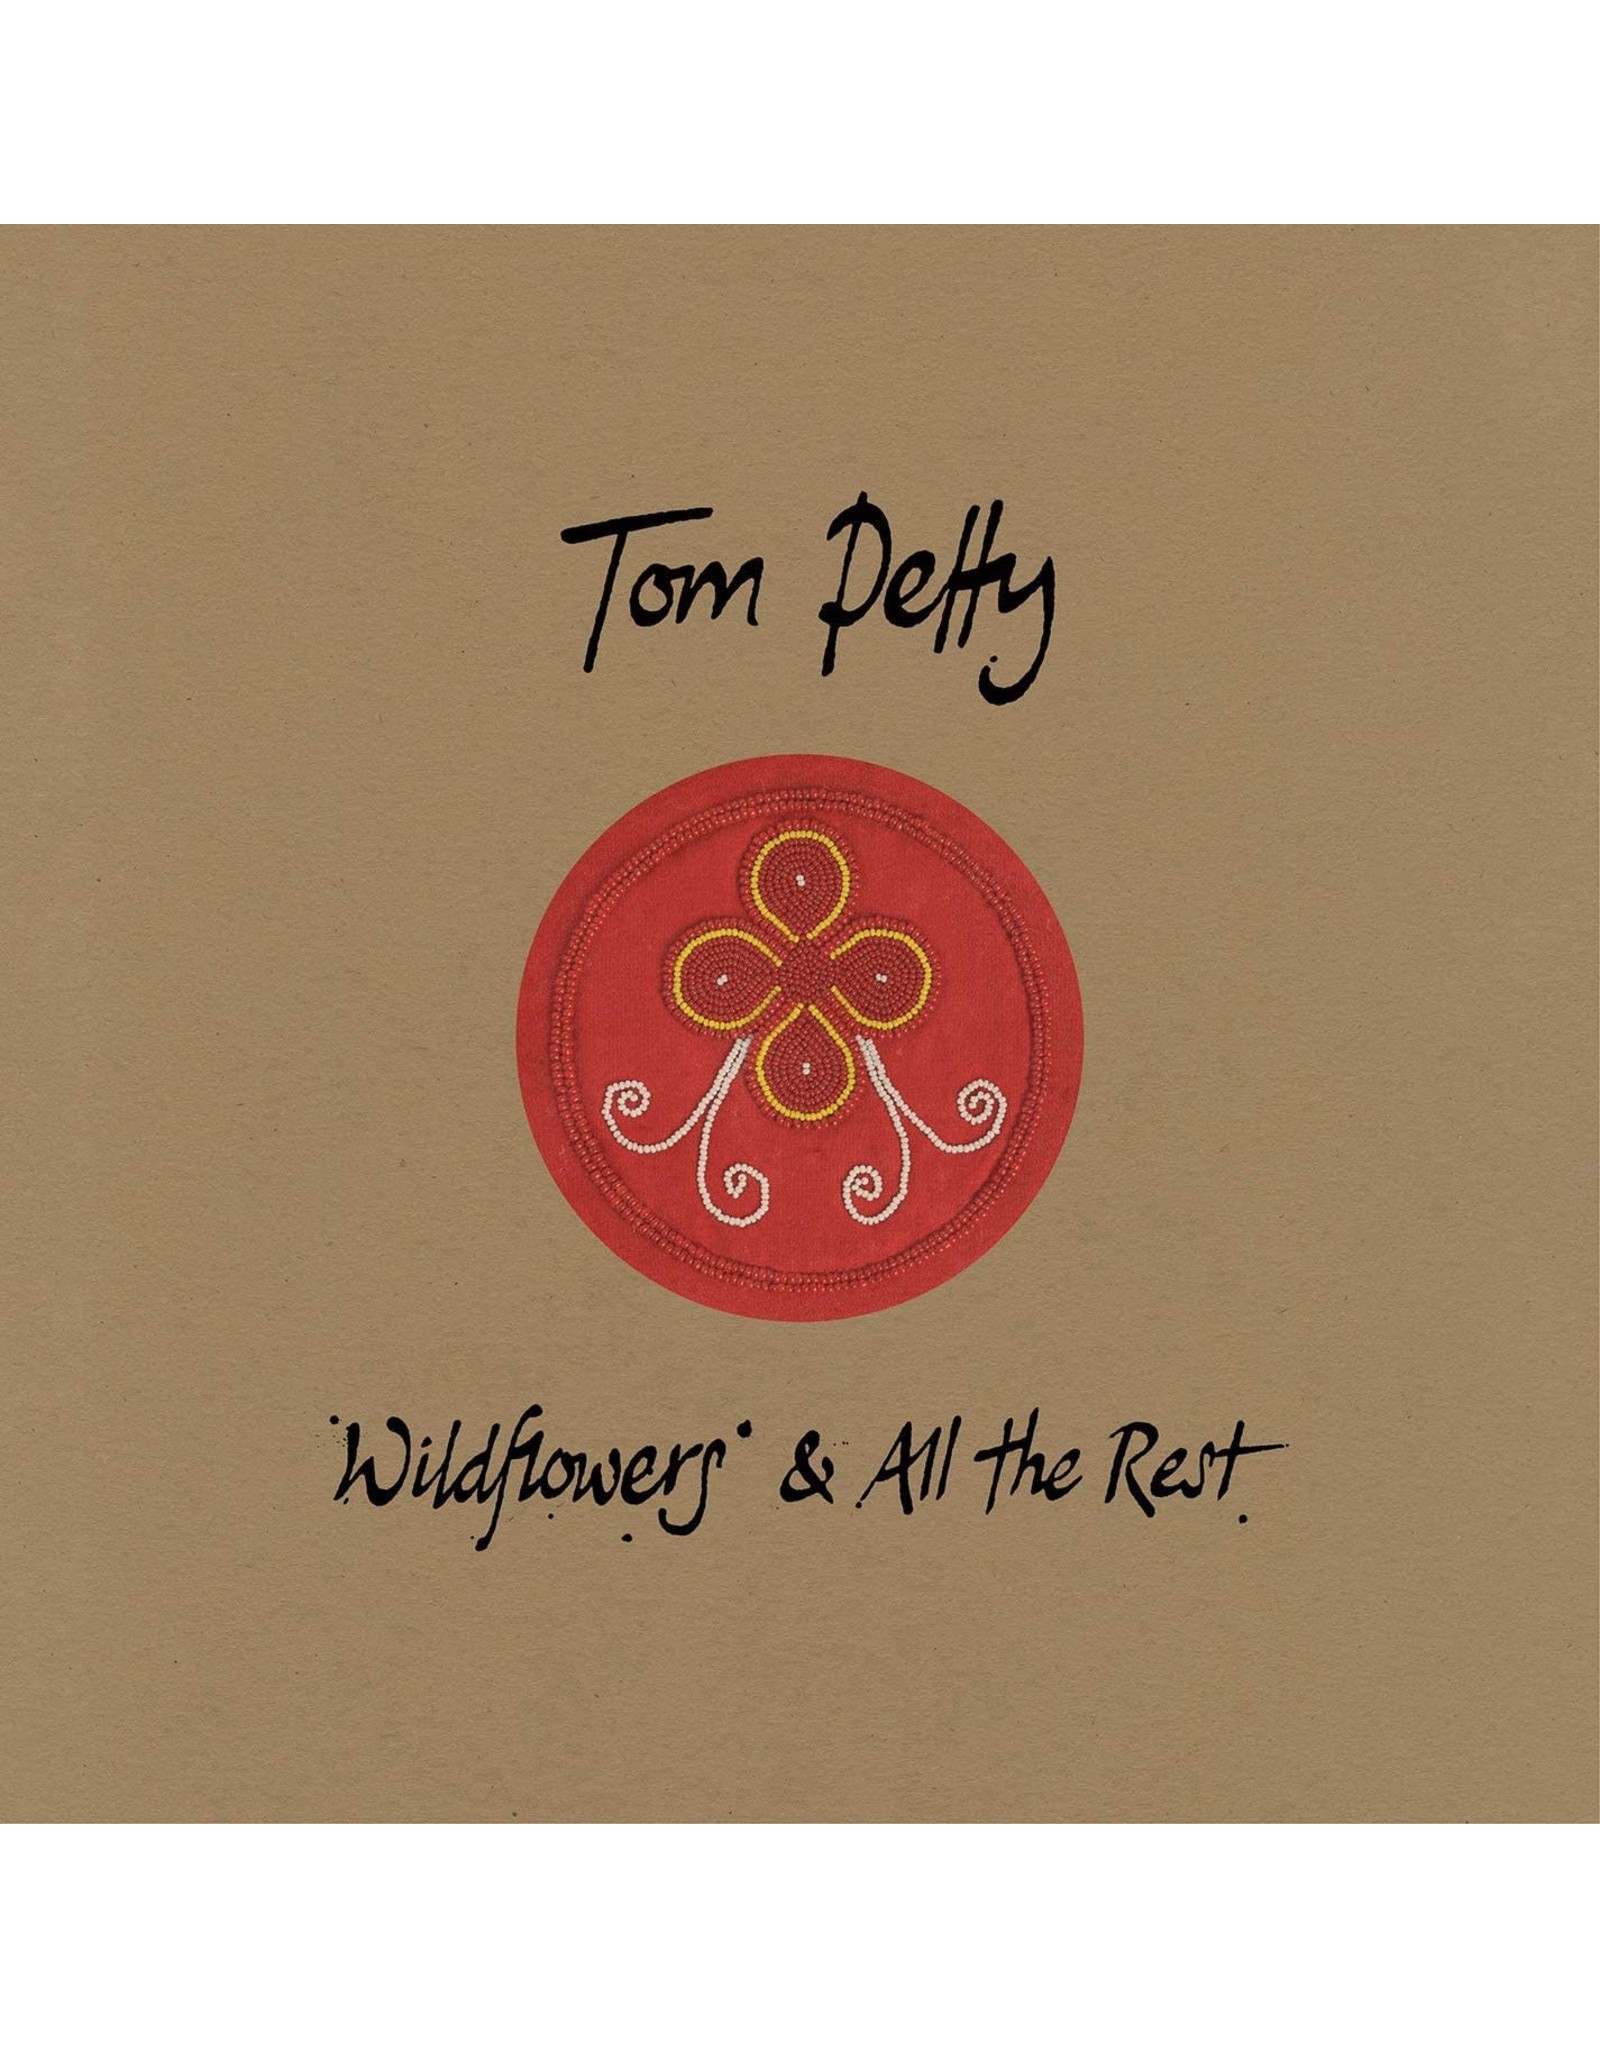 Tom Petty - Wildflowers And All The Rest (Deluxe Vinyl Edition)